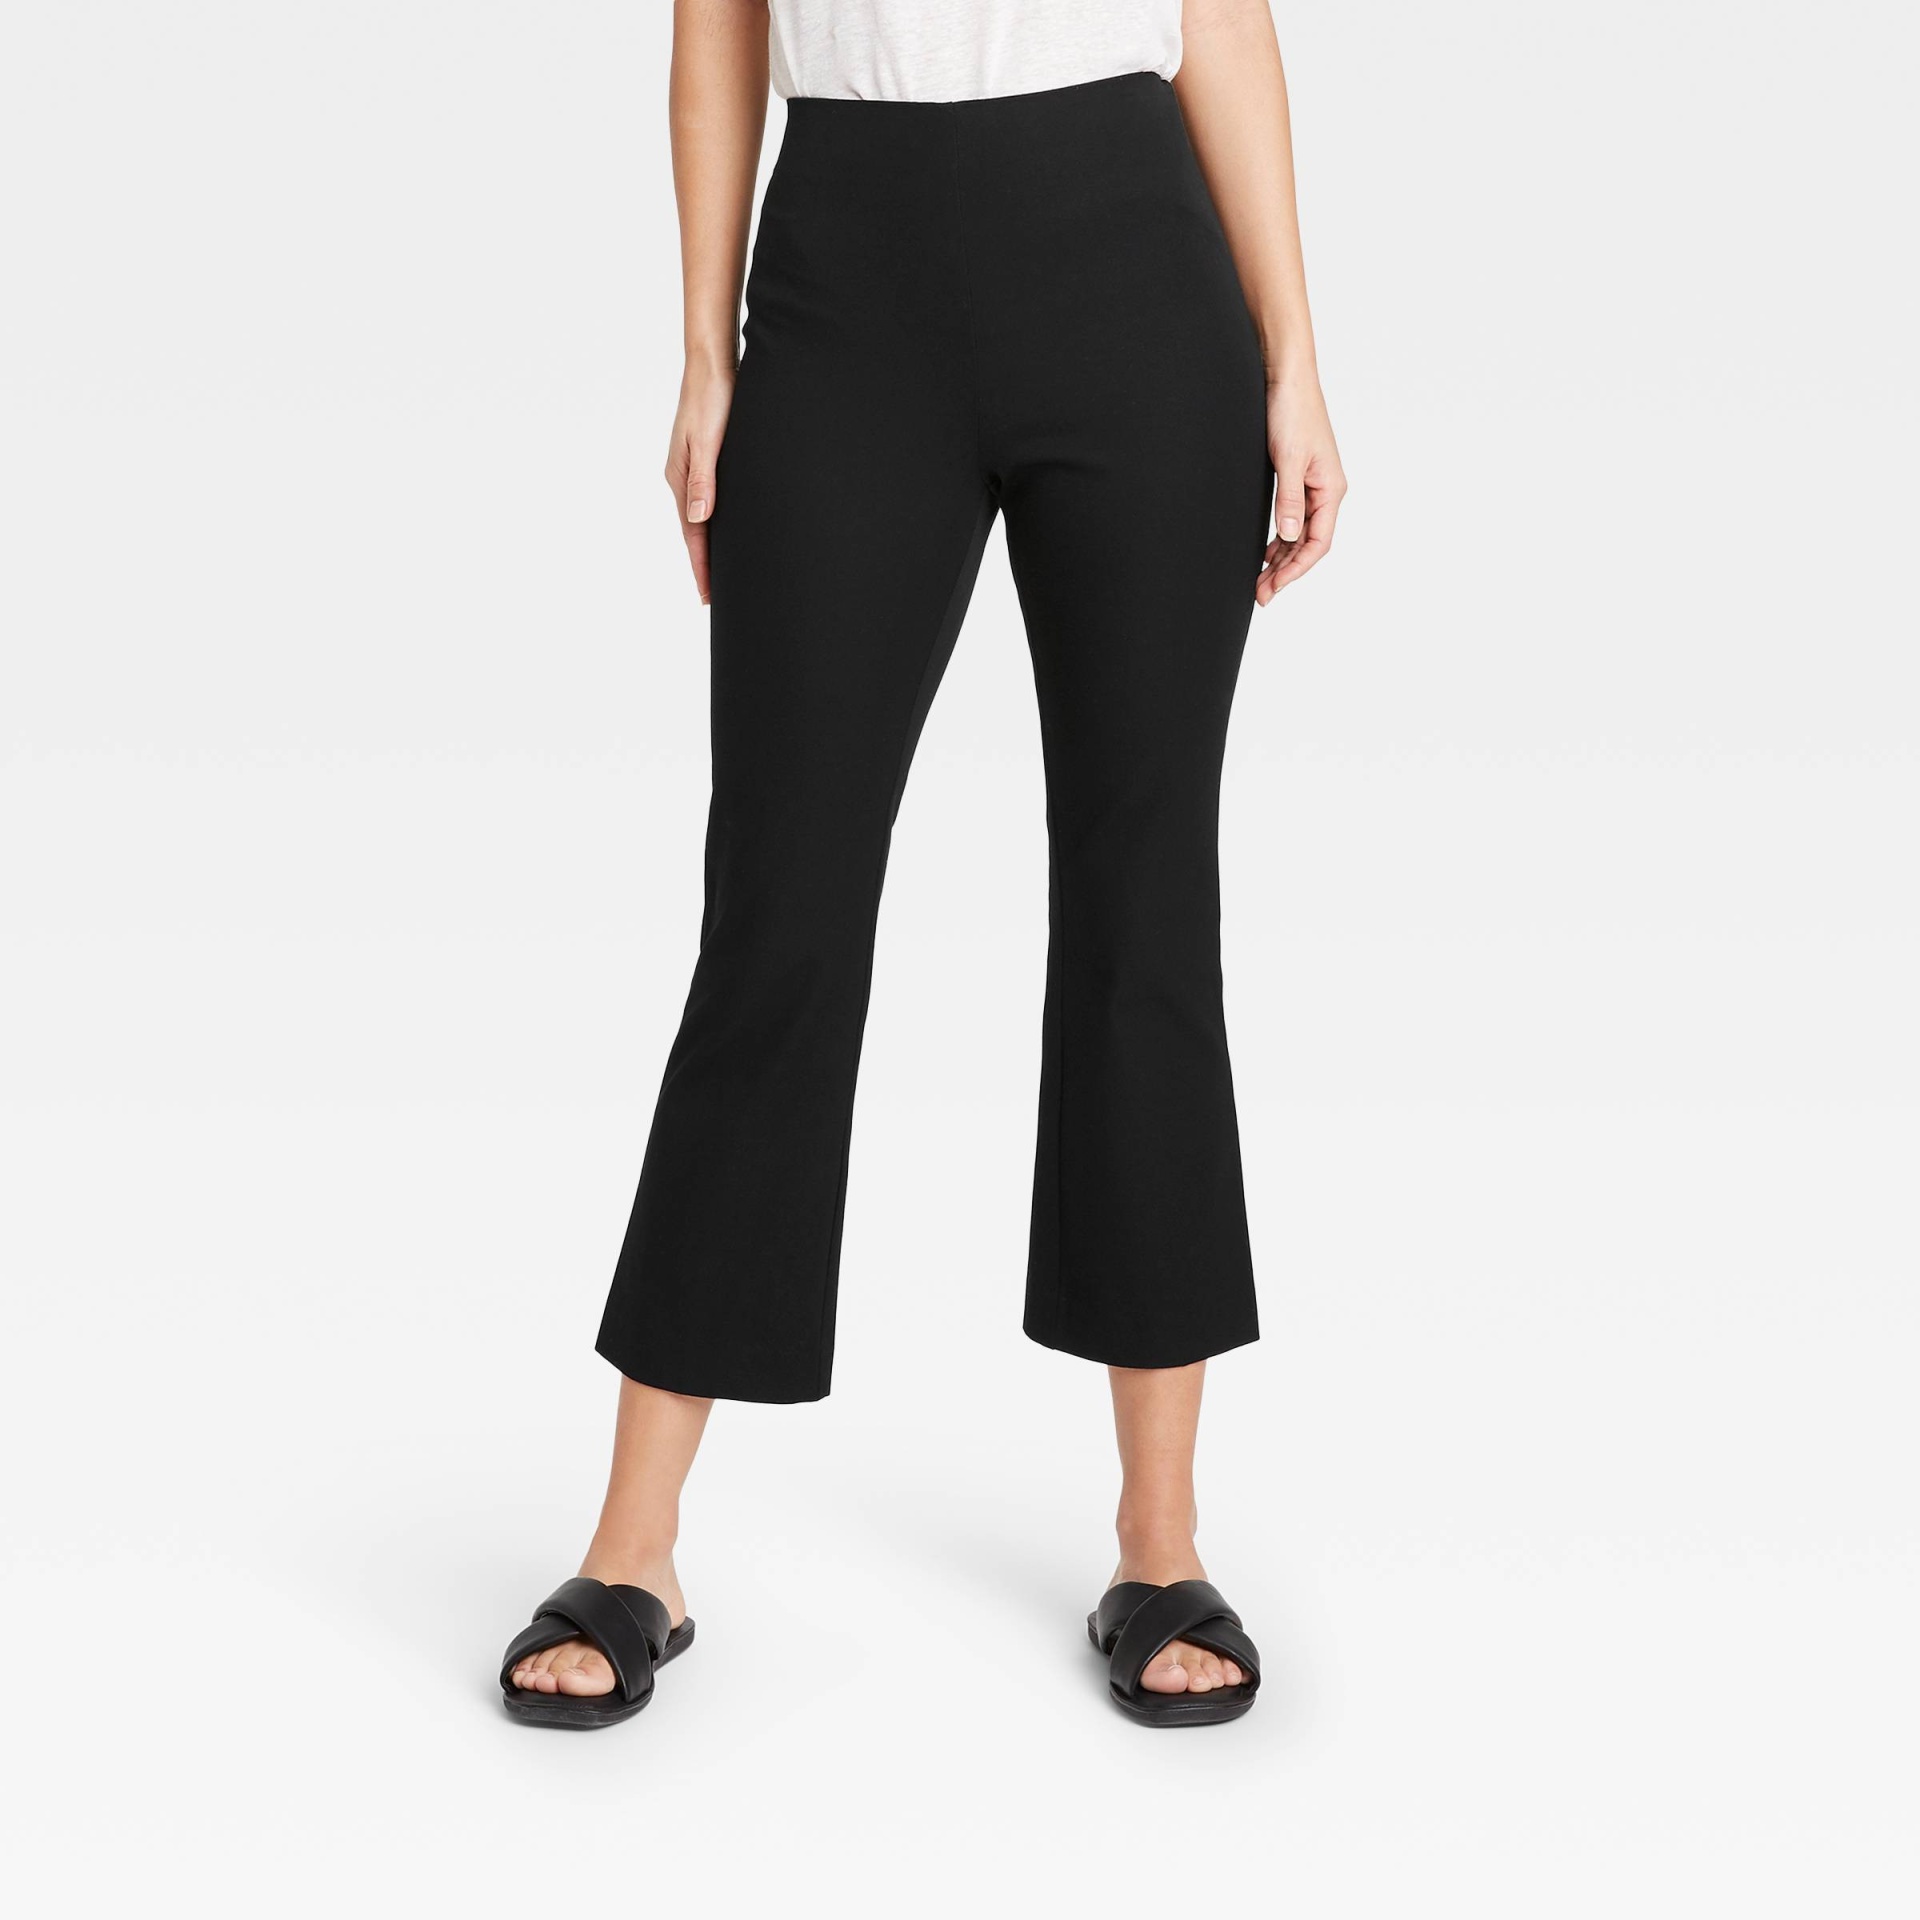 Women's High-Rise Flare Cropped Pants - A New Day Black 8 1 ct